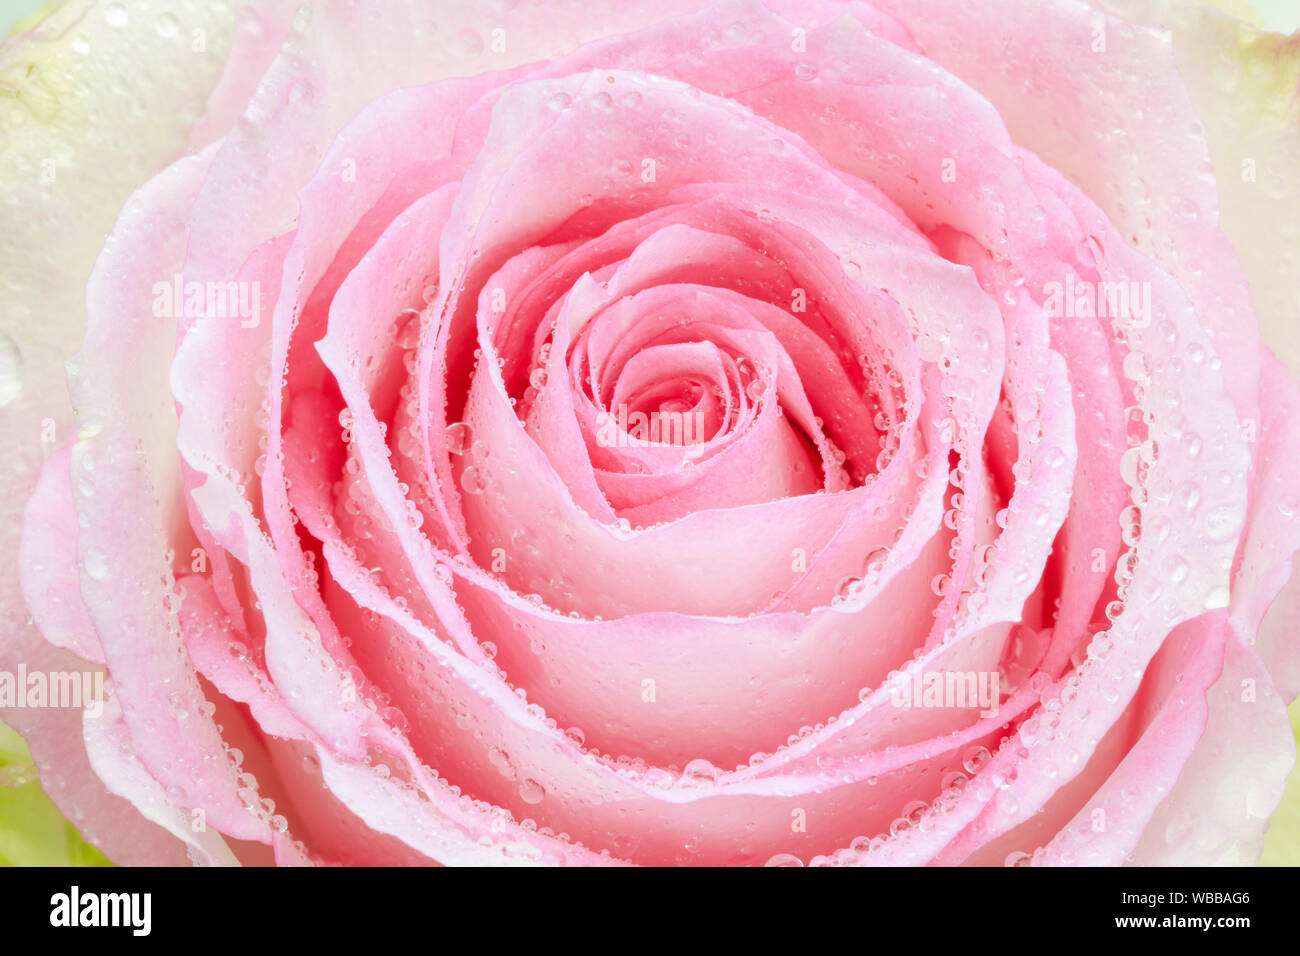 Page 2 - Rosa Sp High Resolution Stock Photography and Images - Alamy